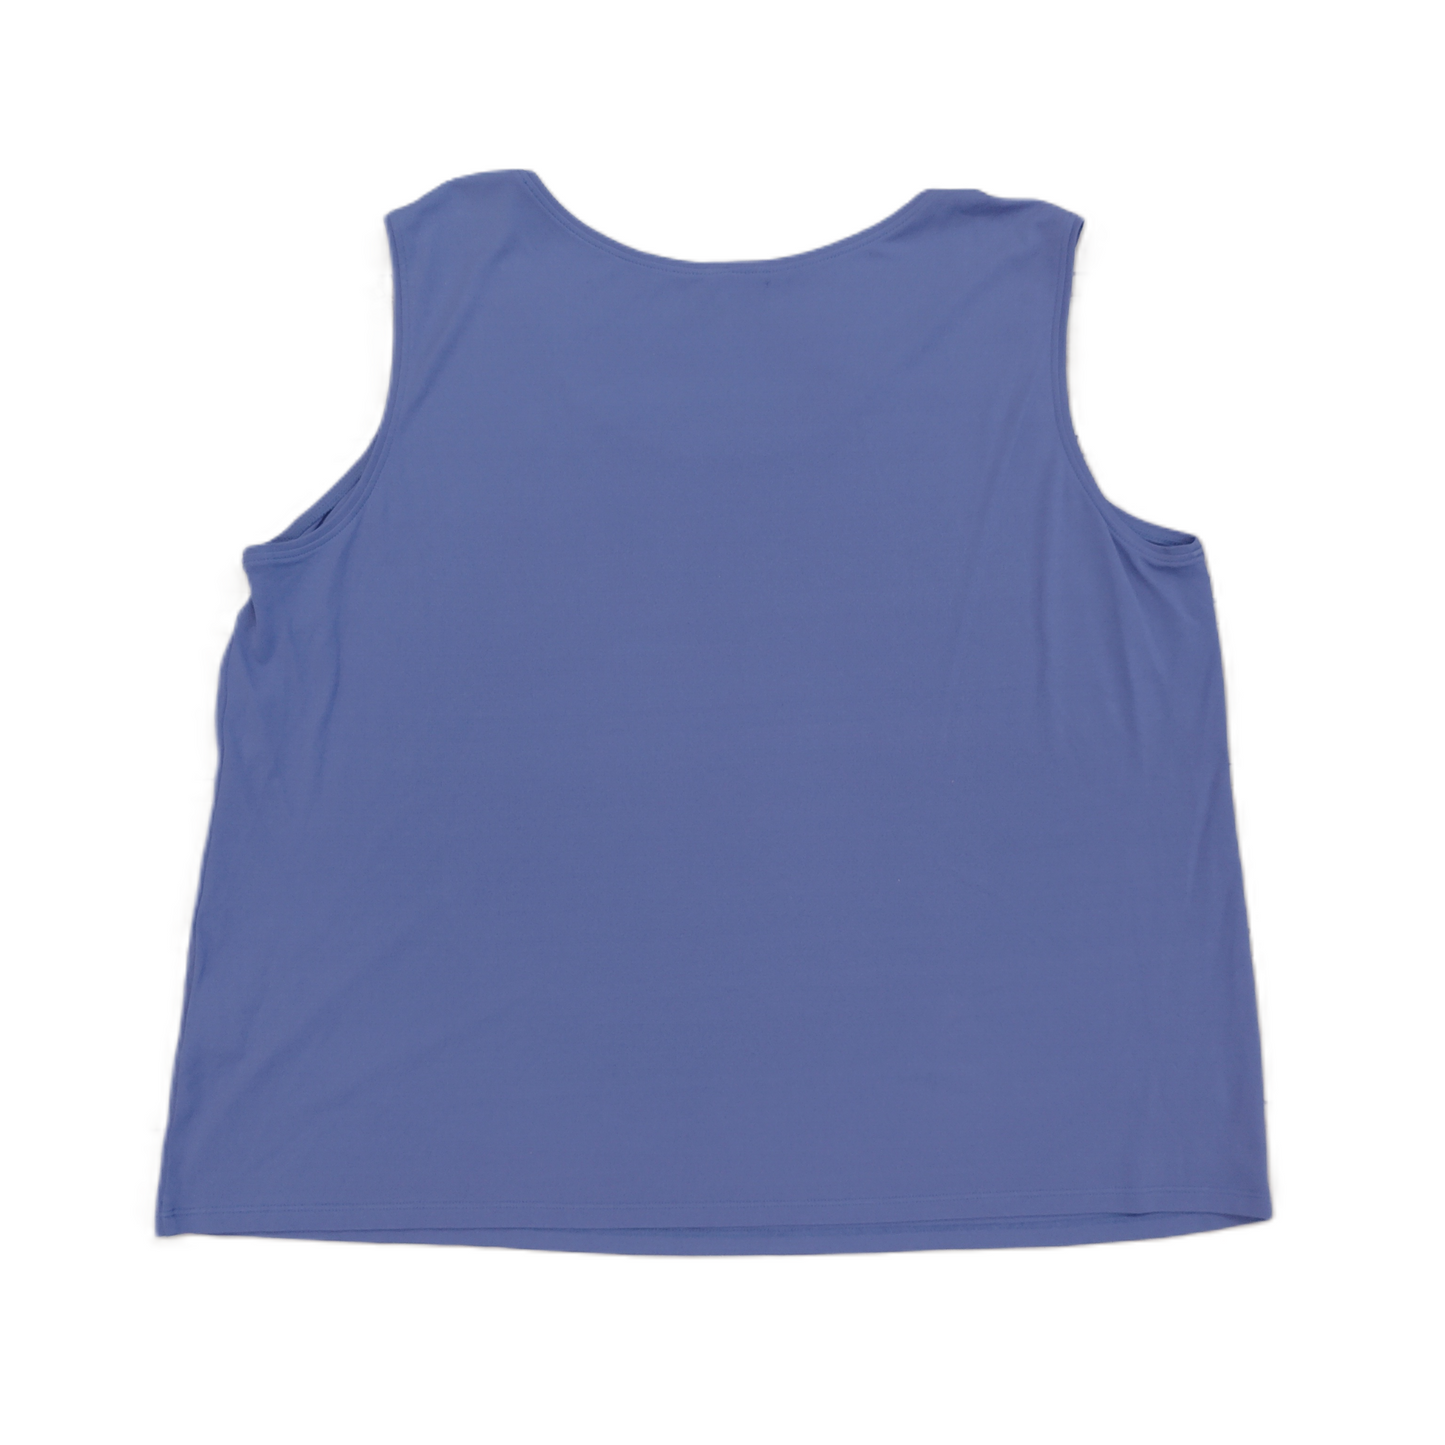 Purple Top Sleeveless Basic By Eileen Fisher, Size: 1x